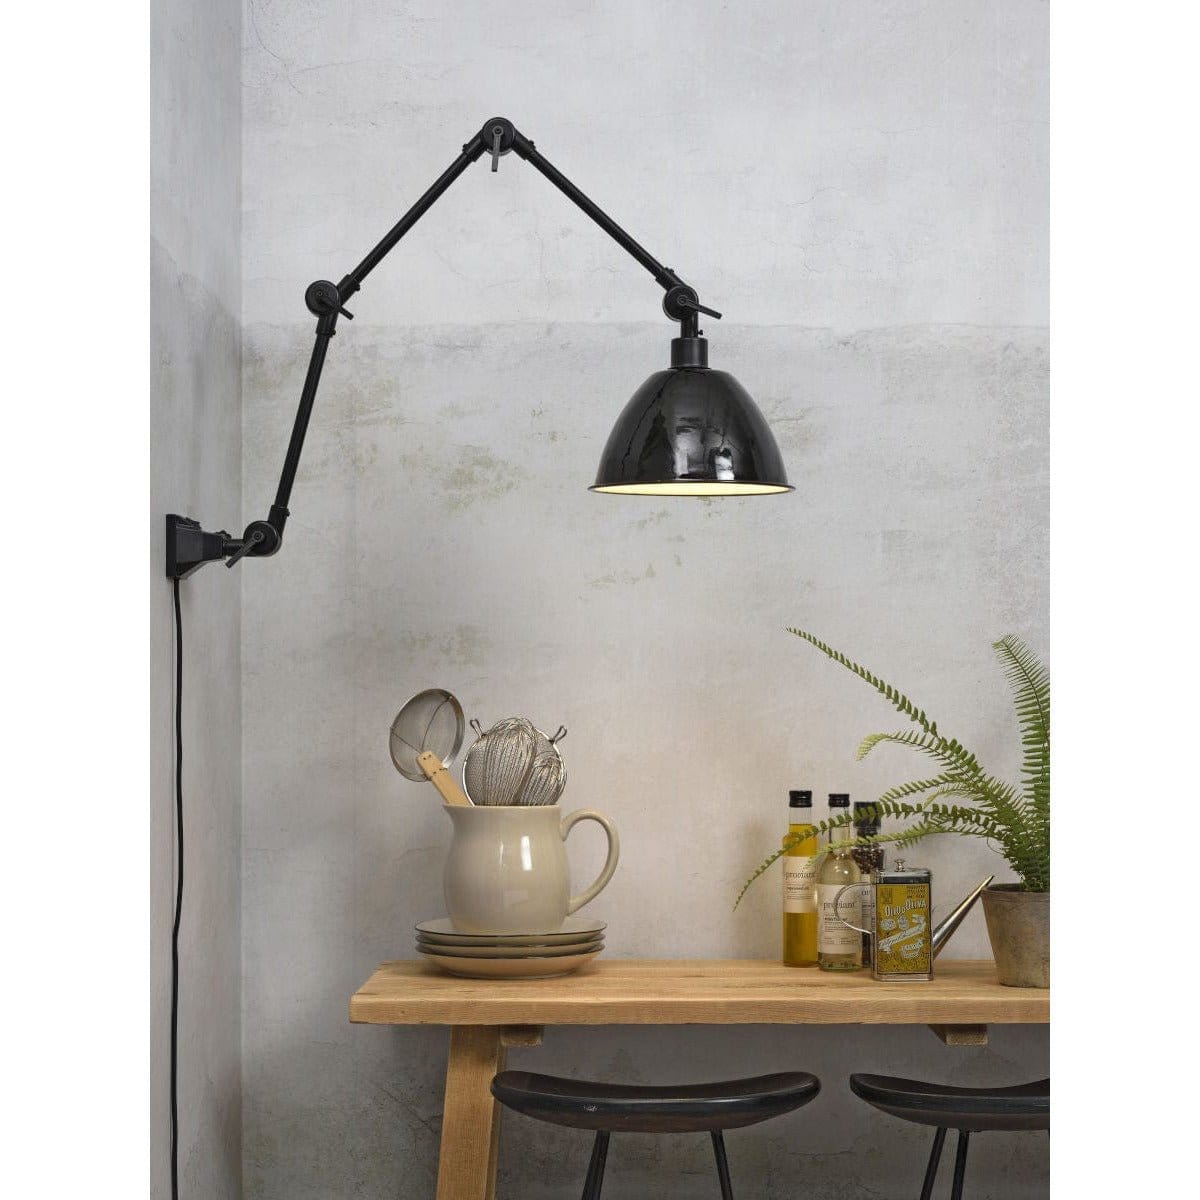 It's About RoMi Wall Lights Large Amsterdam Wall Light, Enamel Shade Black